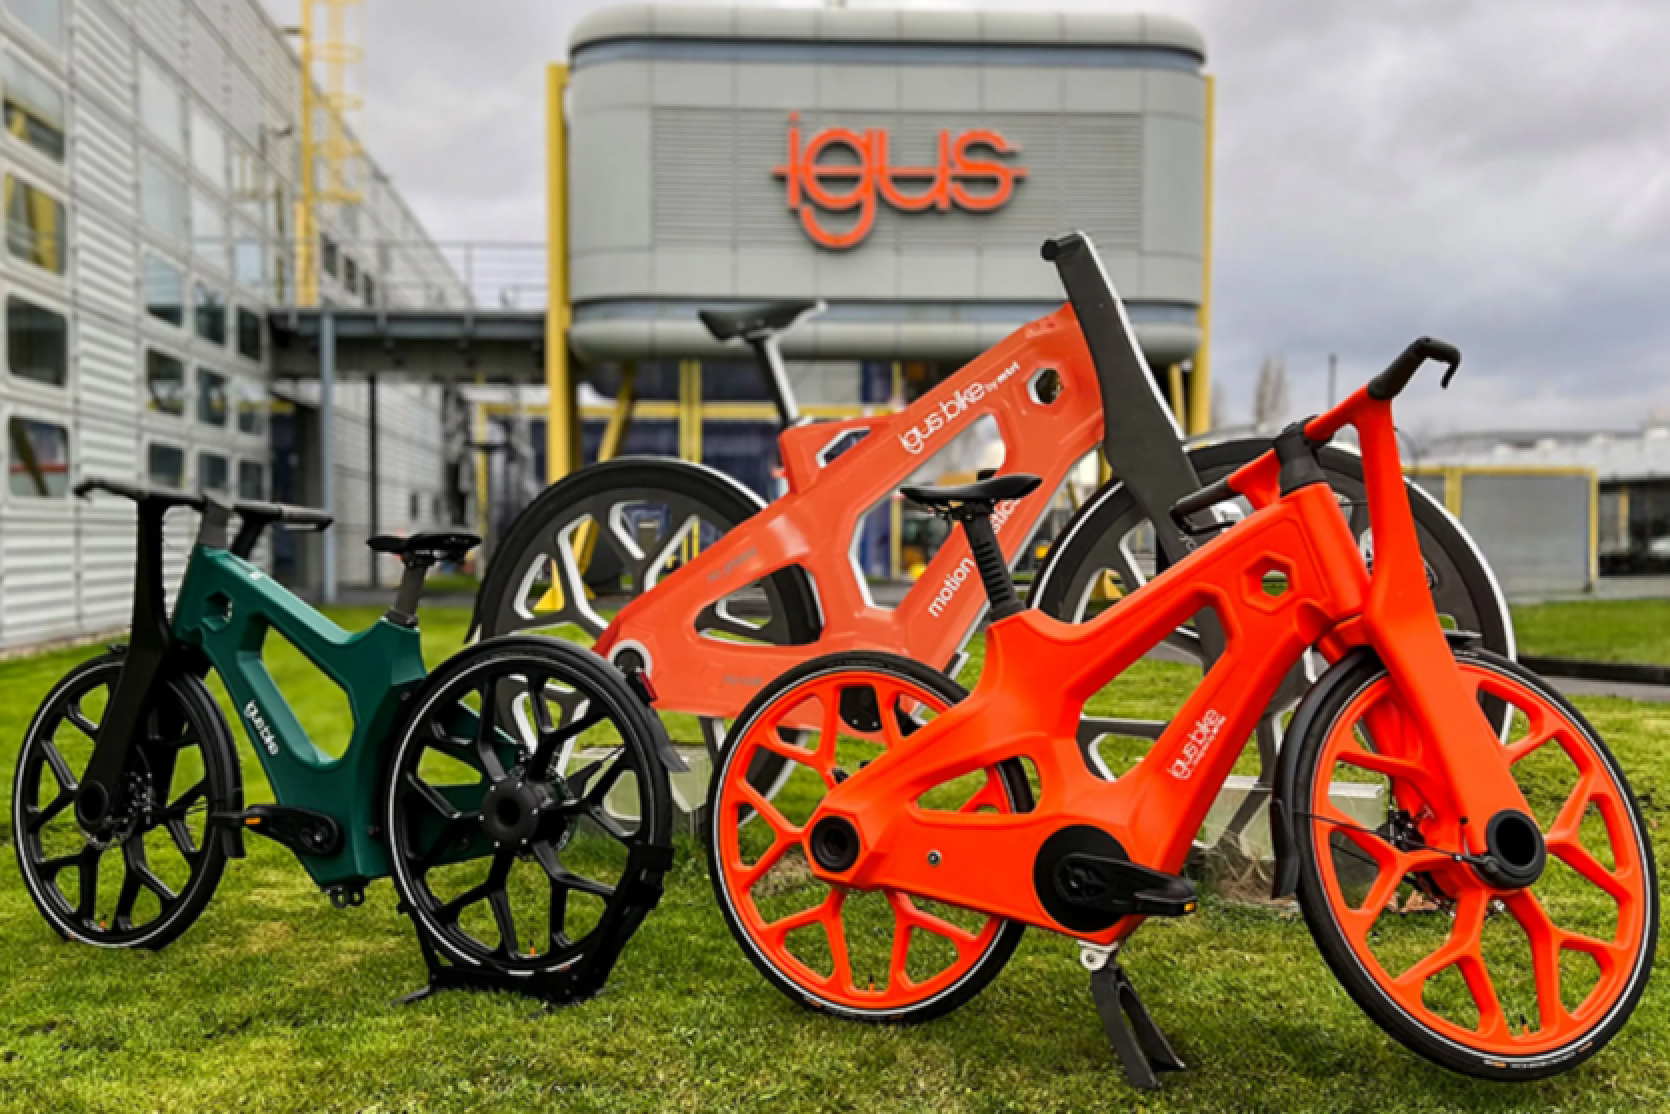 Production has started on the €1200 RCYL eco-friendly bike made... out of plastic